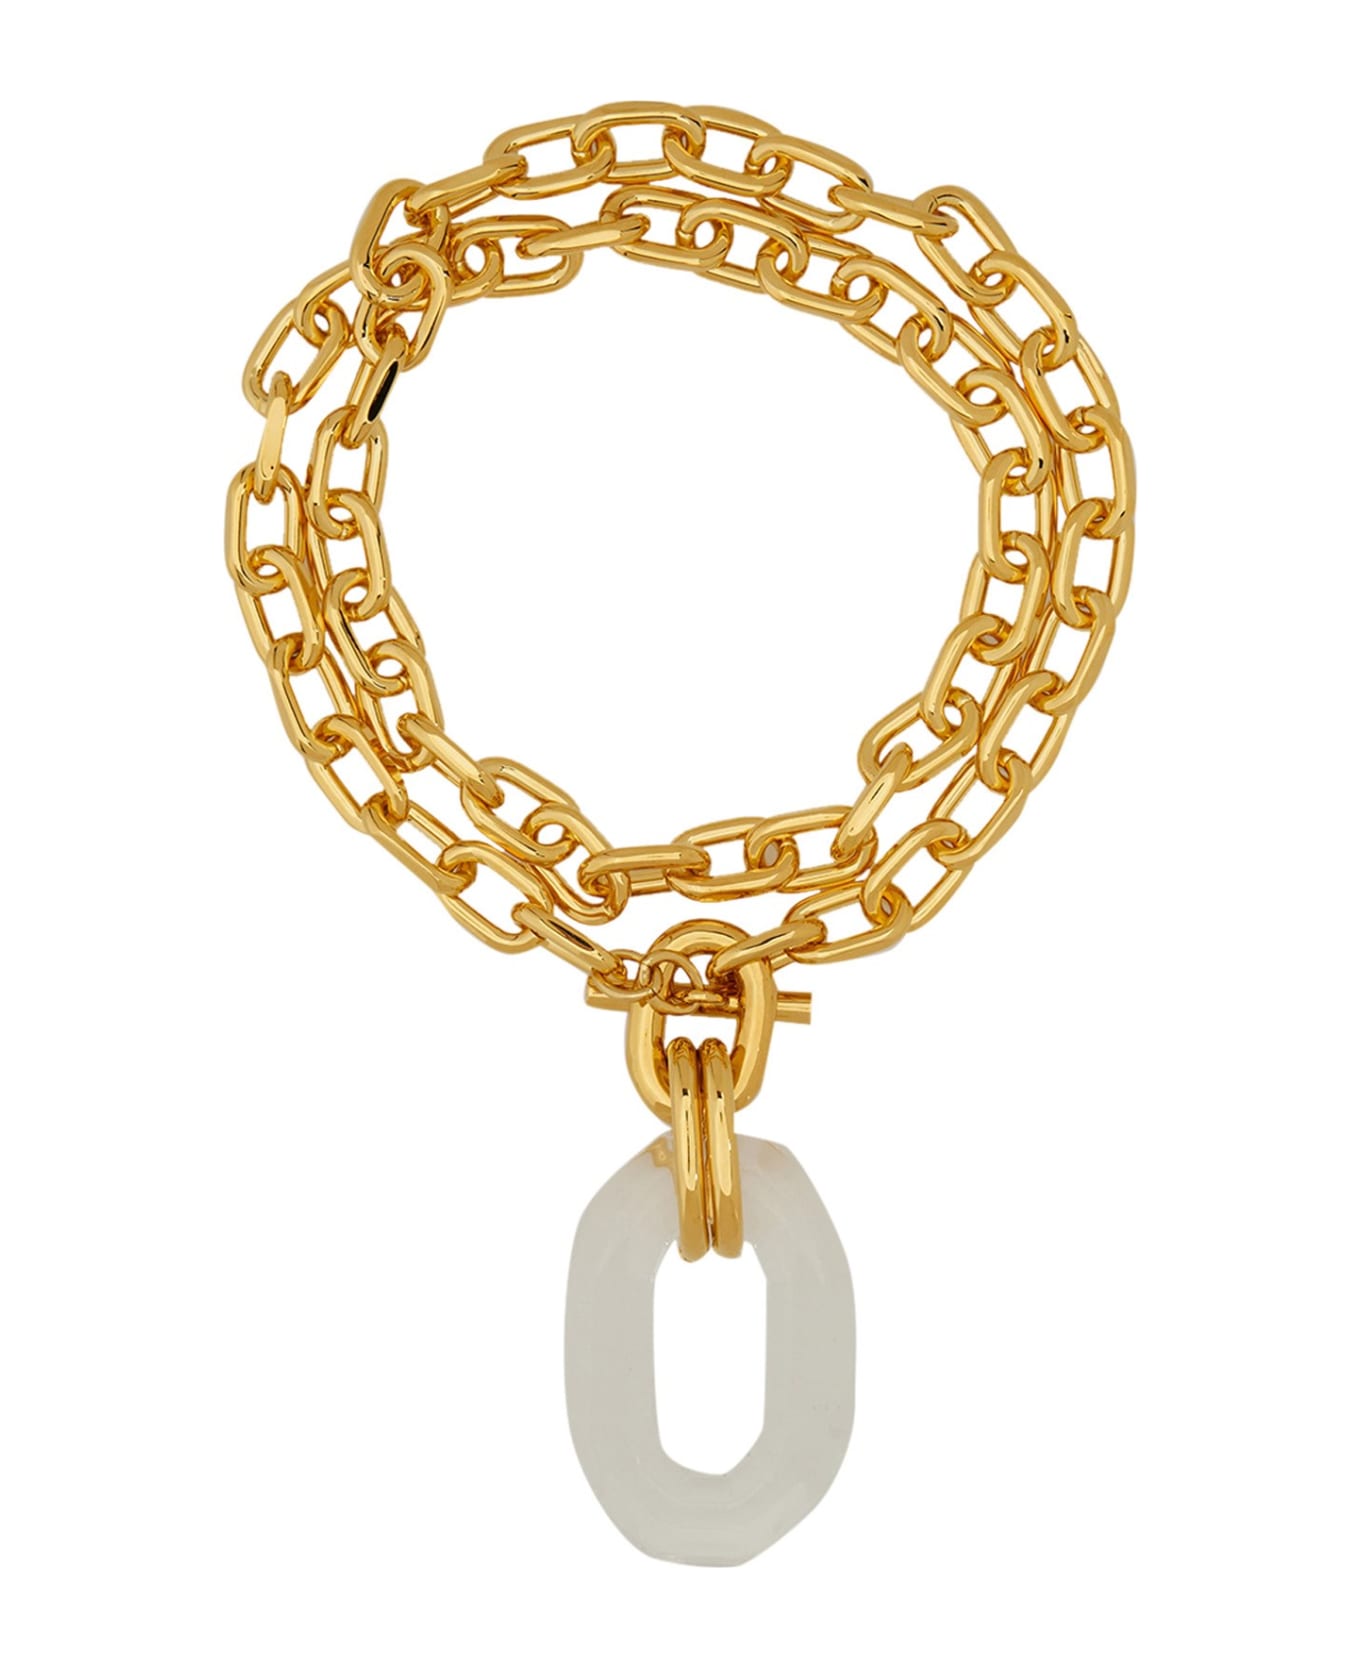 Paco Rabanne Necklace With Chain - Gold Transparent ネックレス